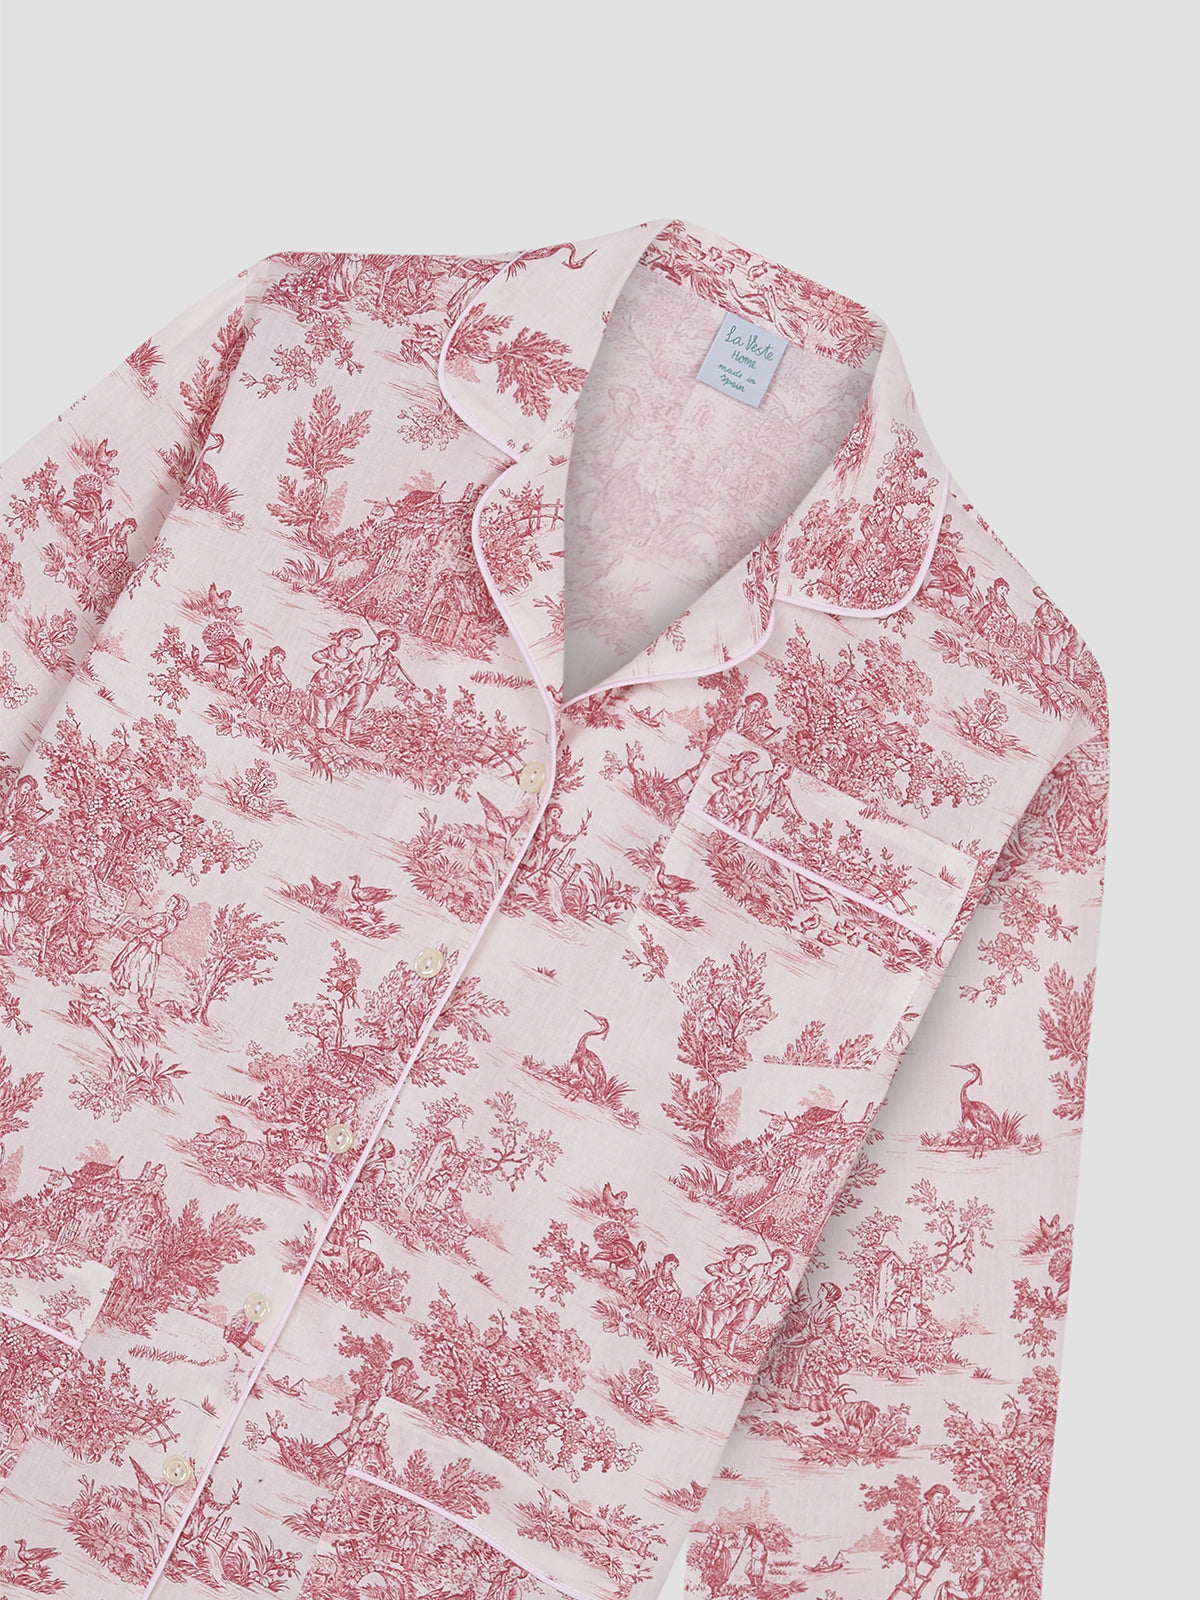 Pajama shirt with Toile de Jouy print Red, front pockets and button closure